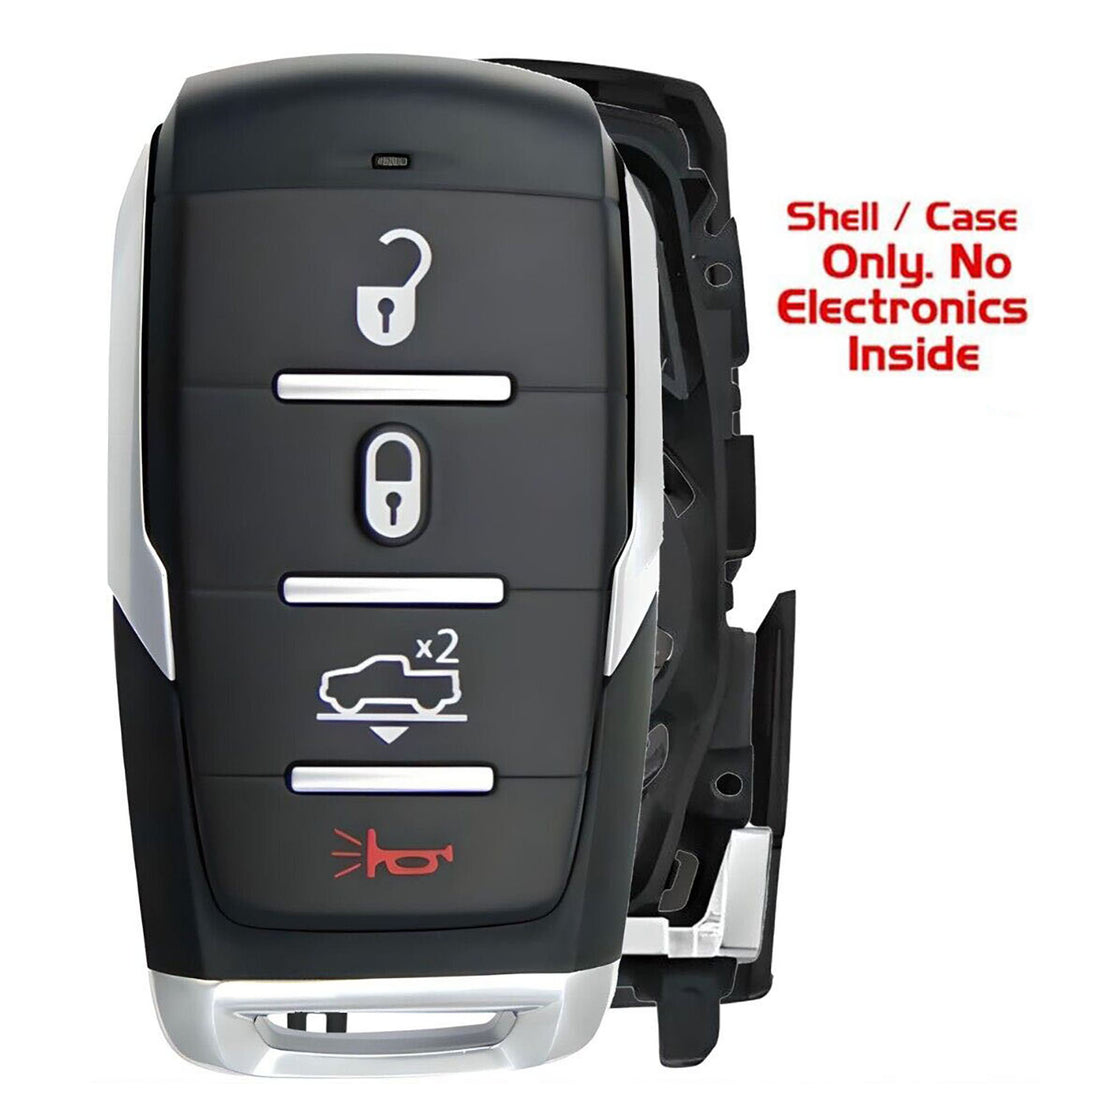 1x New Replacement Proximity Key Fob Remote SHELL / CASE Compatible with & Fit For 2019-2023 RAM 1500 - MPN OHT-4882056-12 (NO electronics or Chip inside)